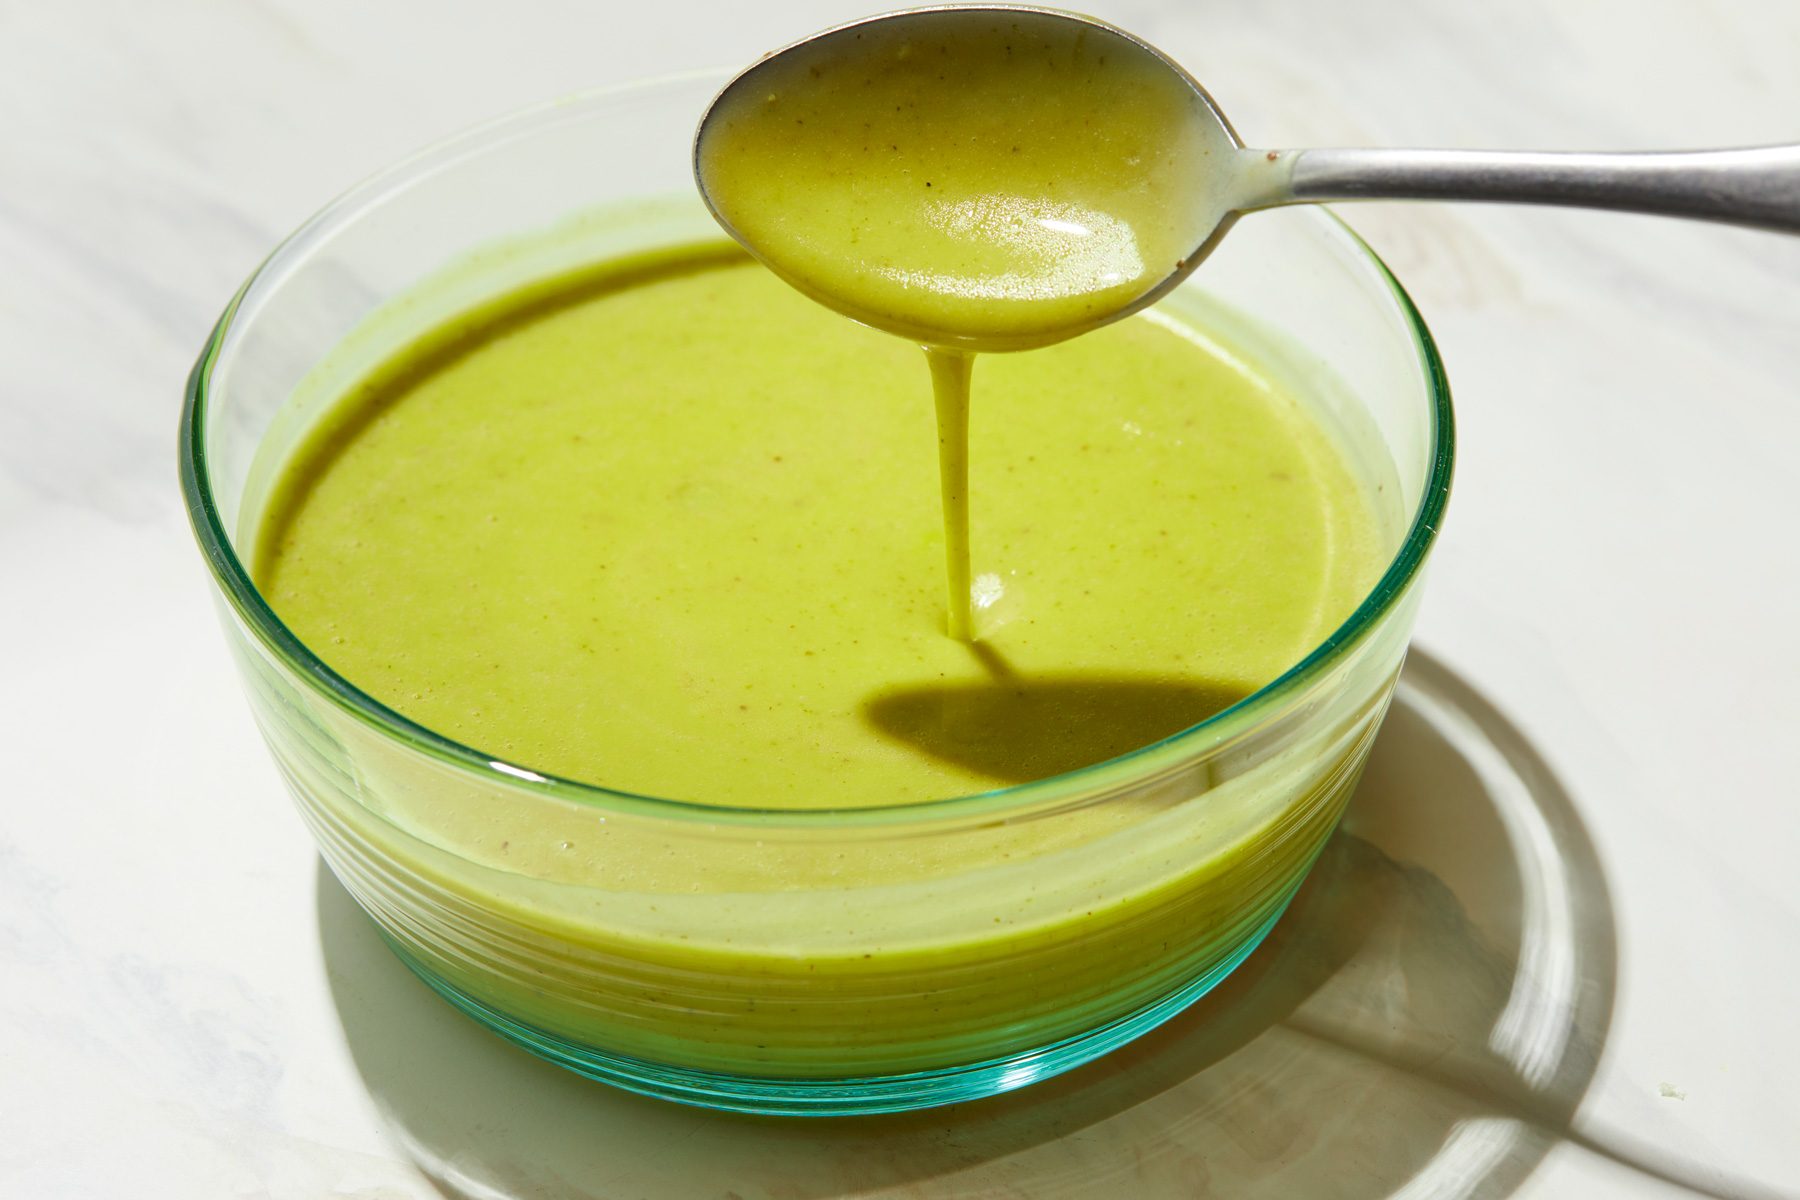 A glass bowl of Cilantro Lime Dressing with a spoon